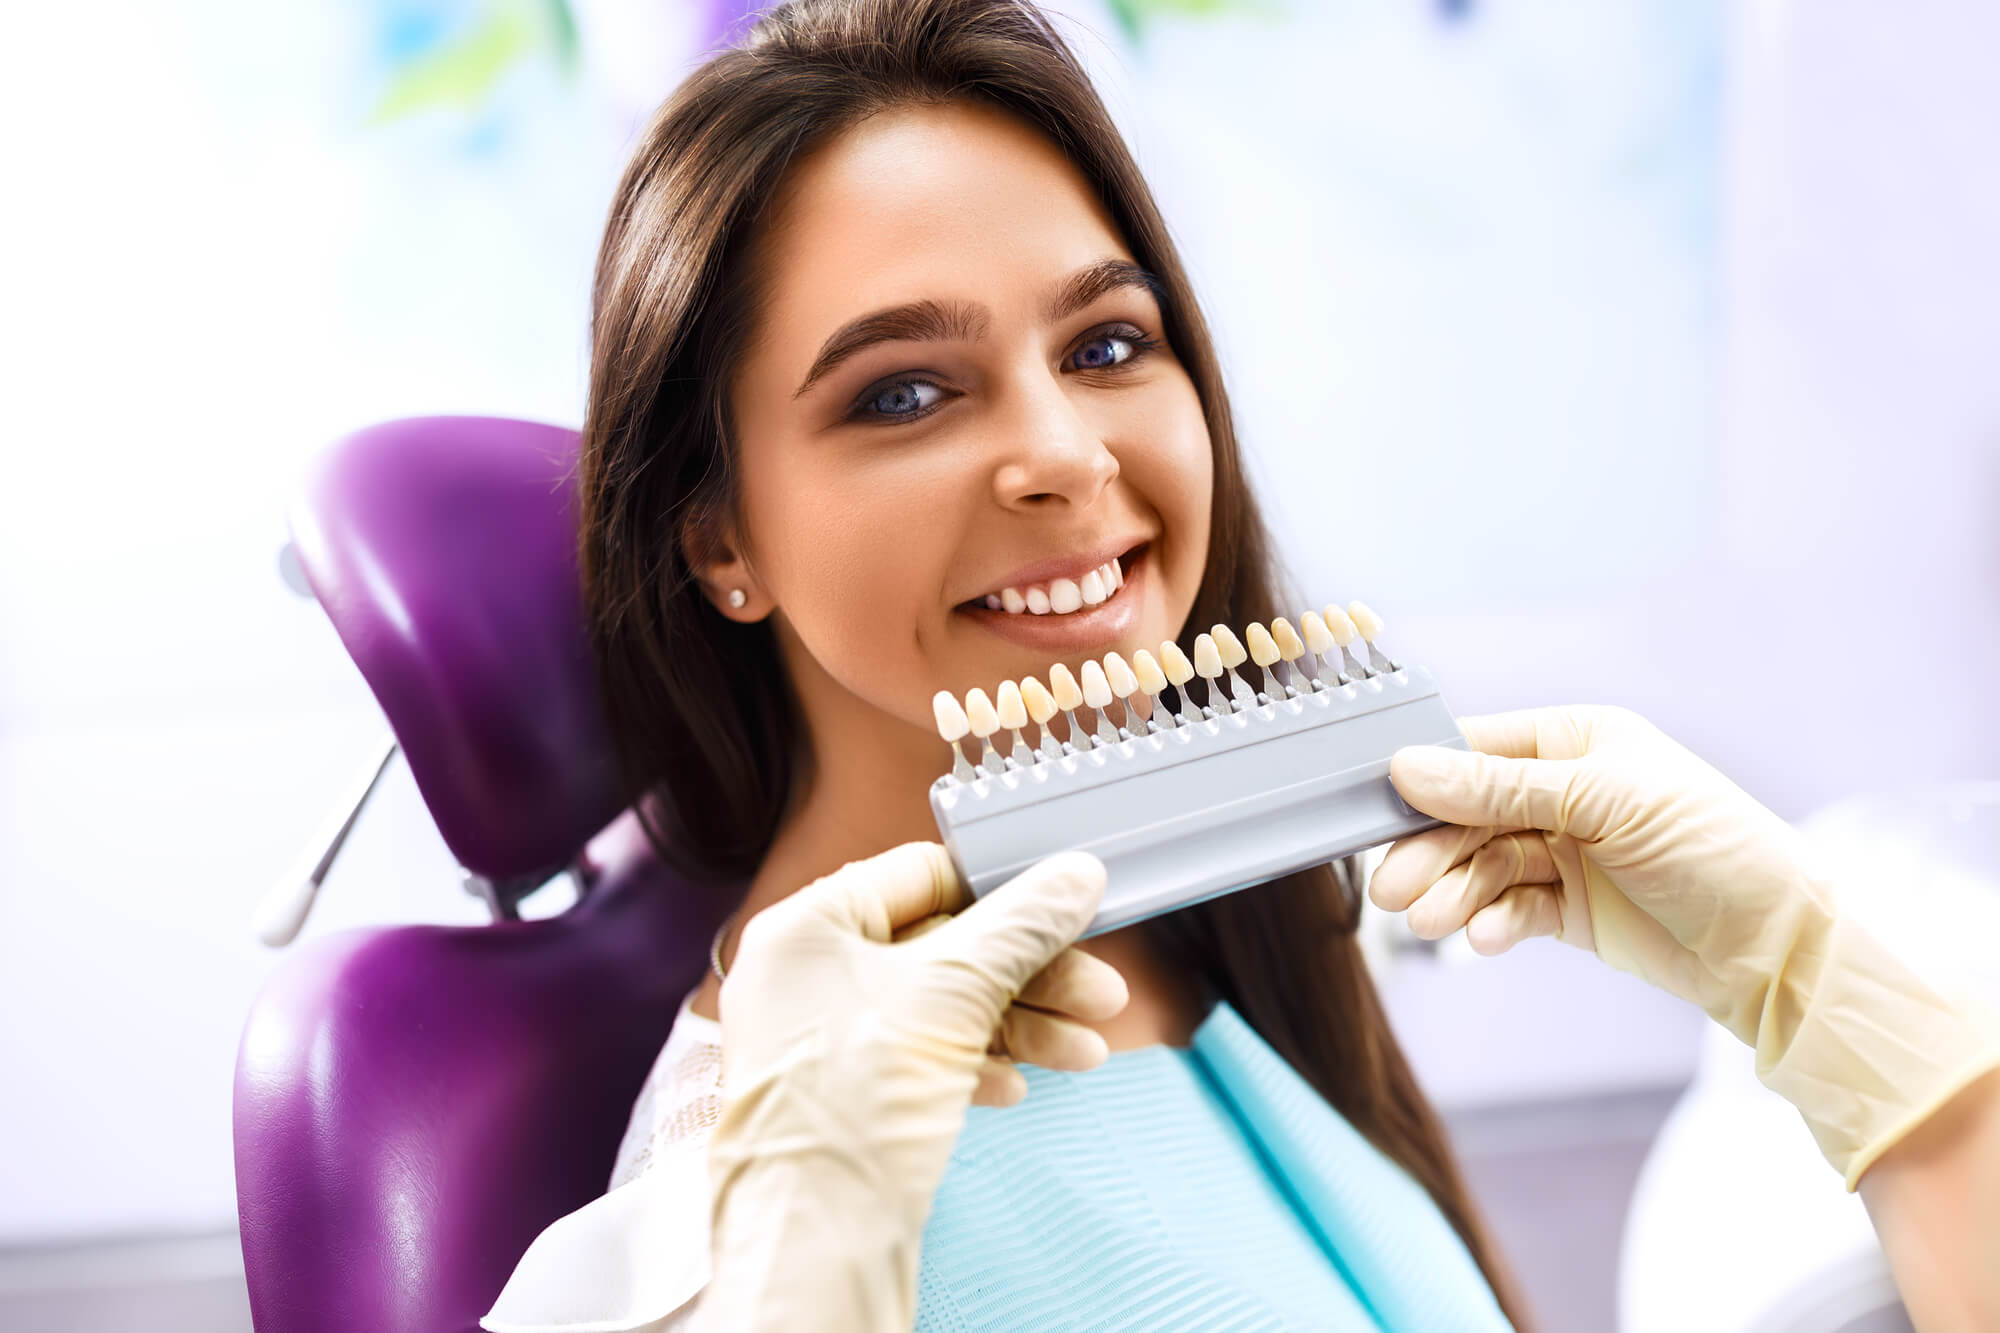 Where can I get Teeth Whitening Coral Gables?